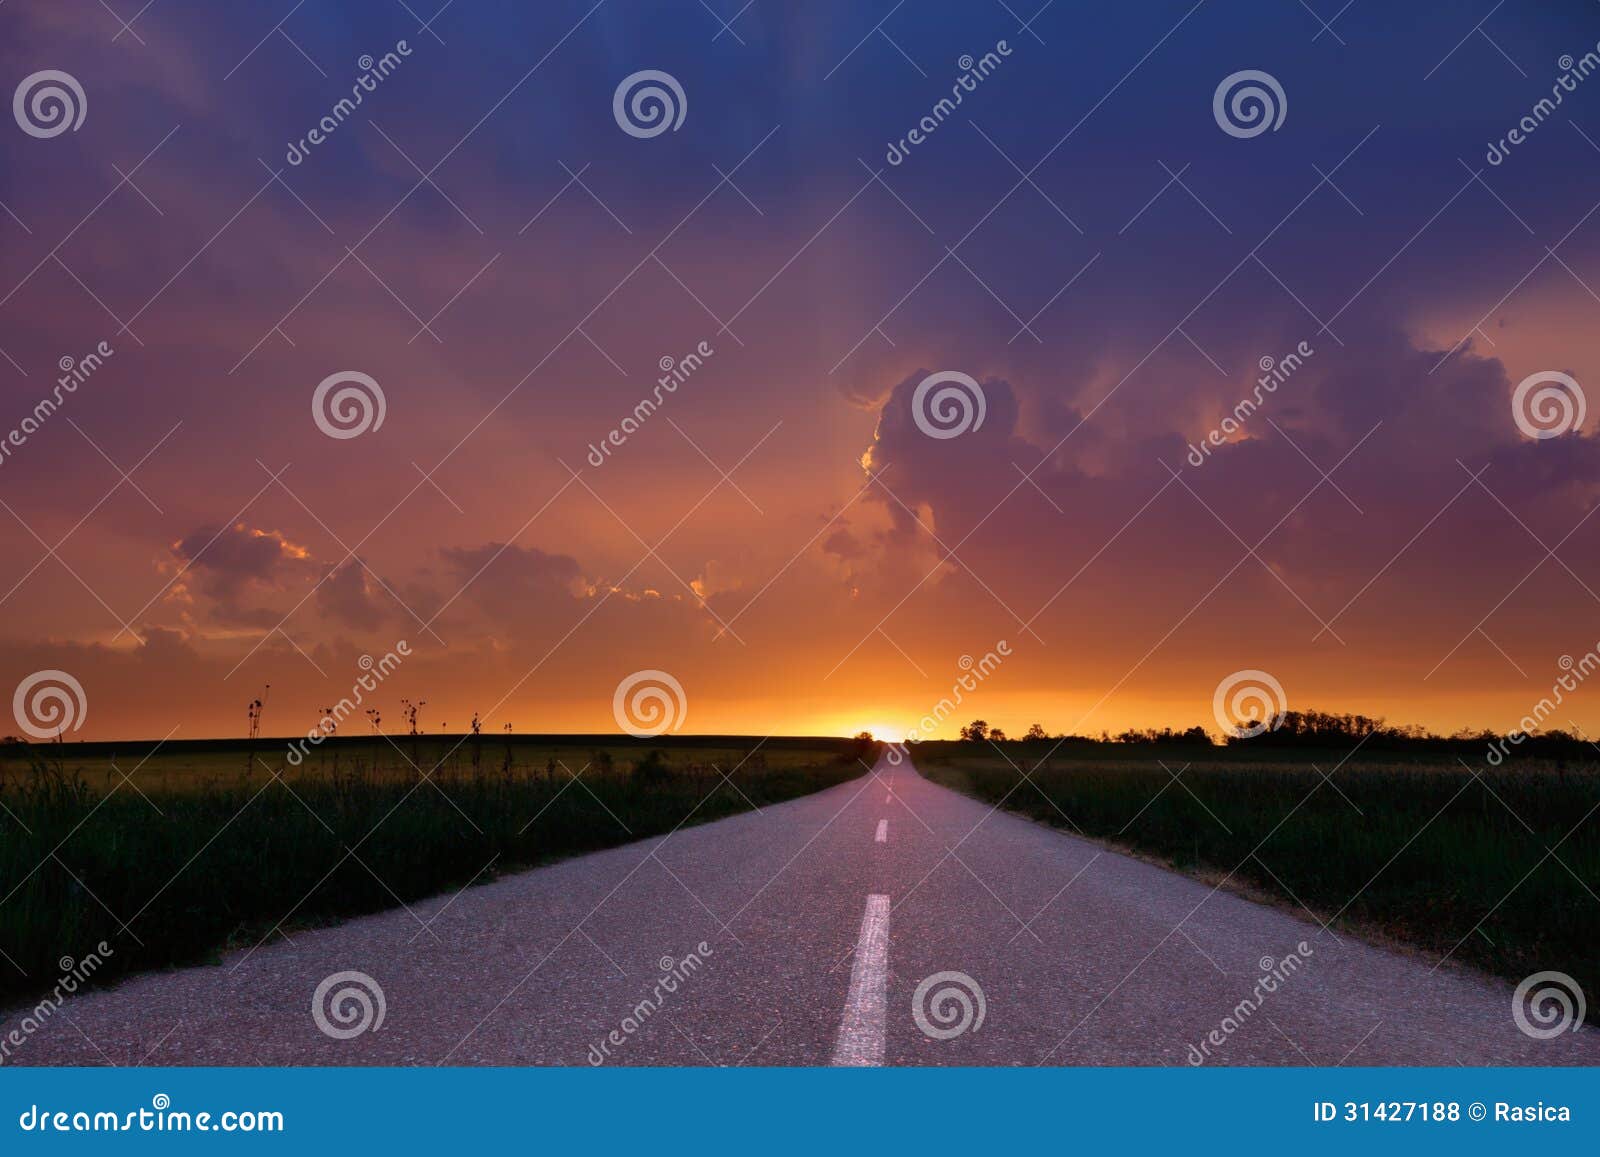 empty road at sunset.